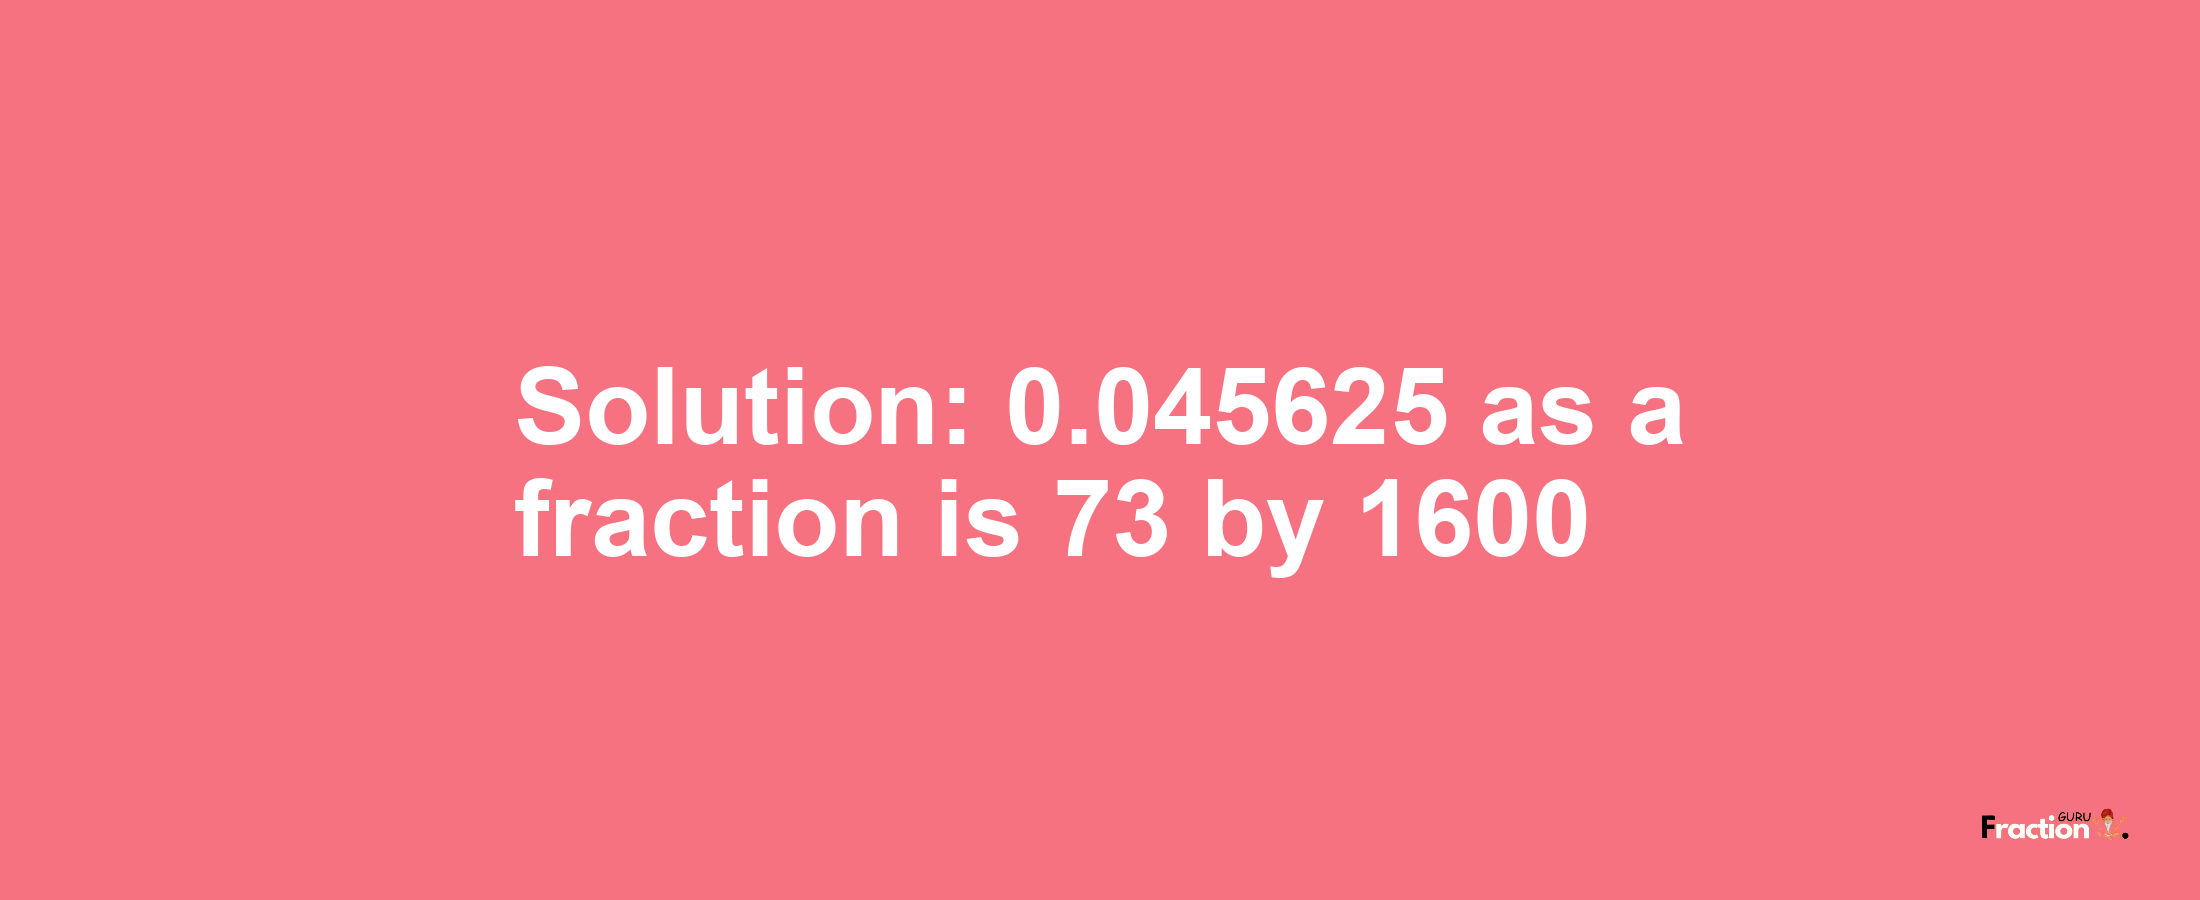 Solution:0.045625 as a fraction is 73/1600